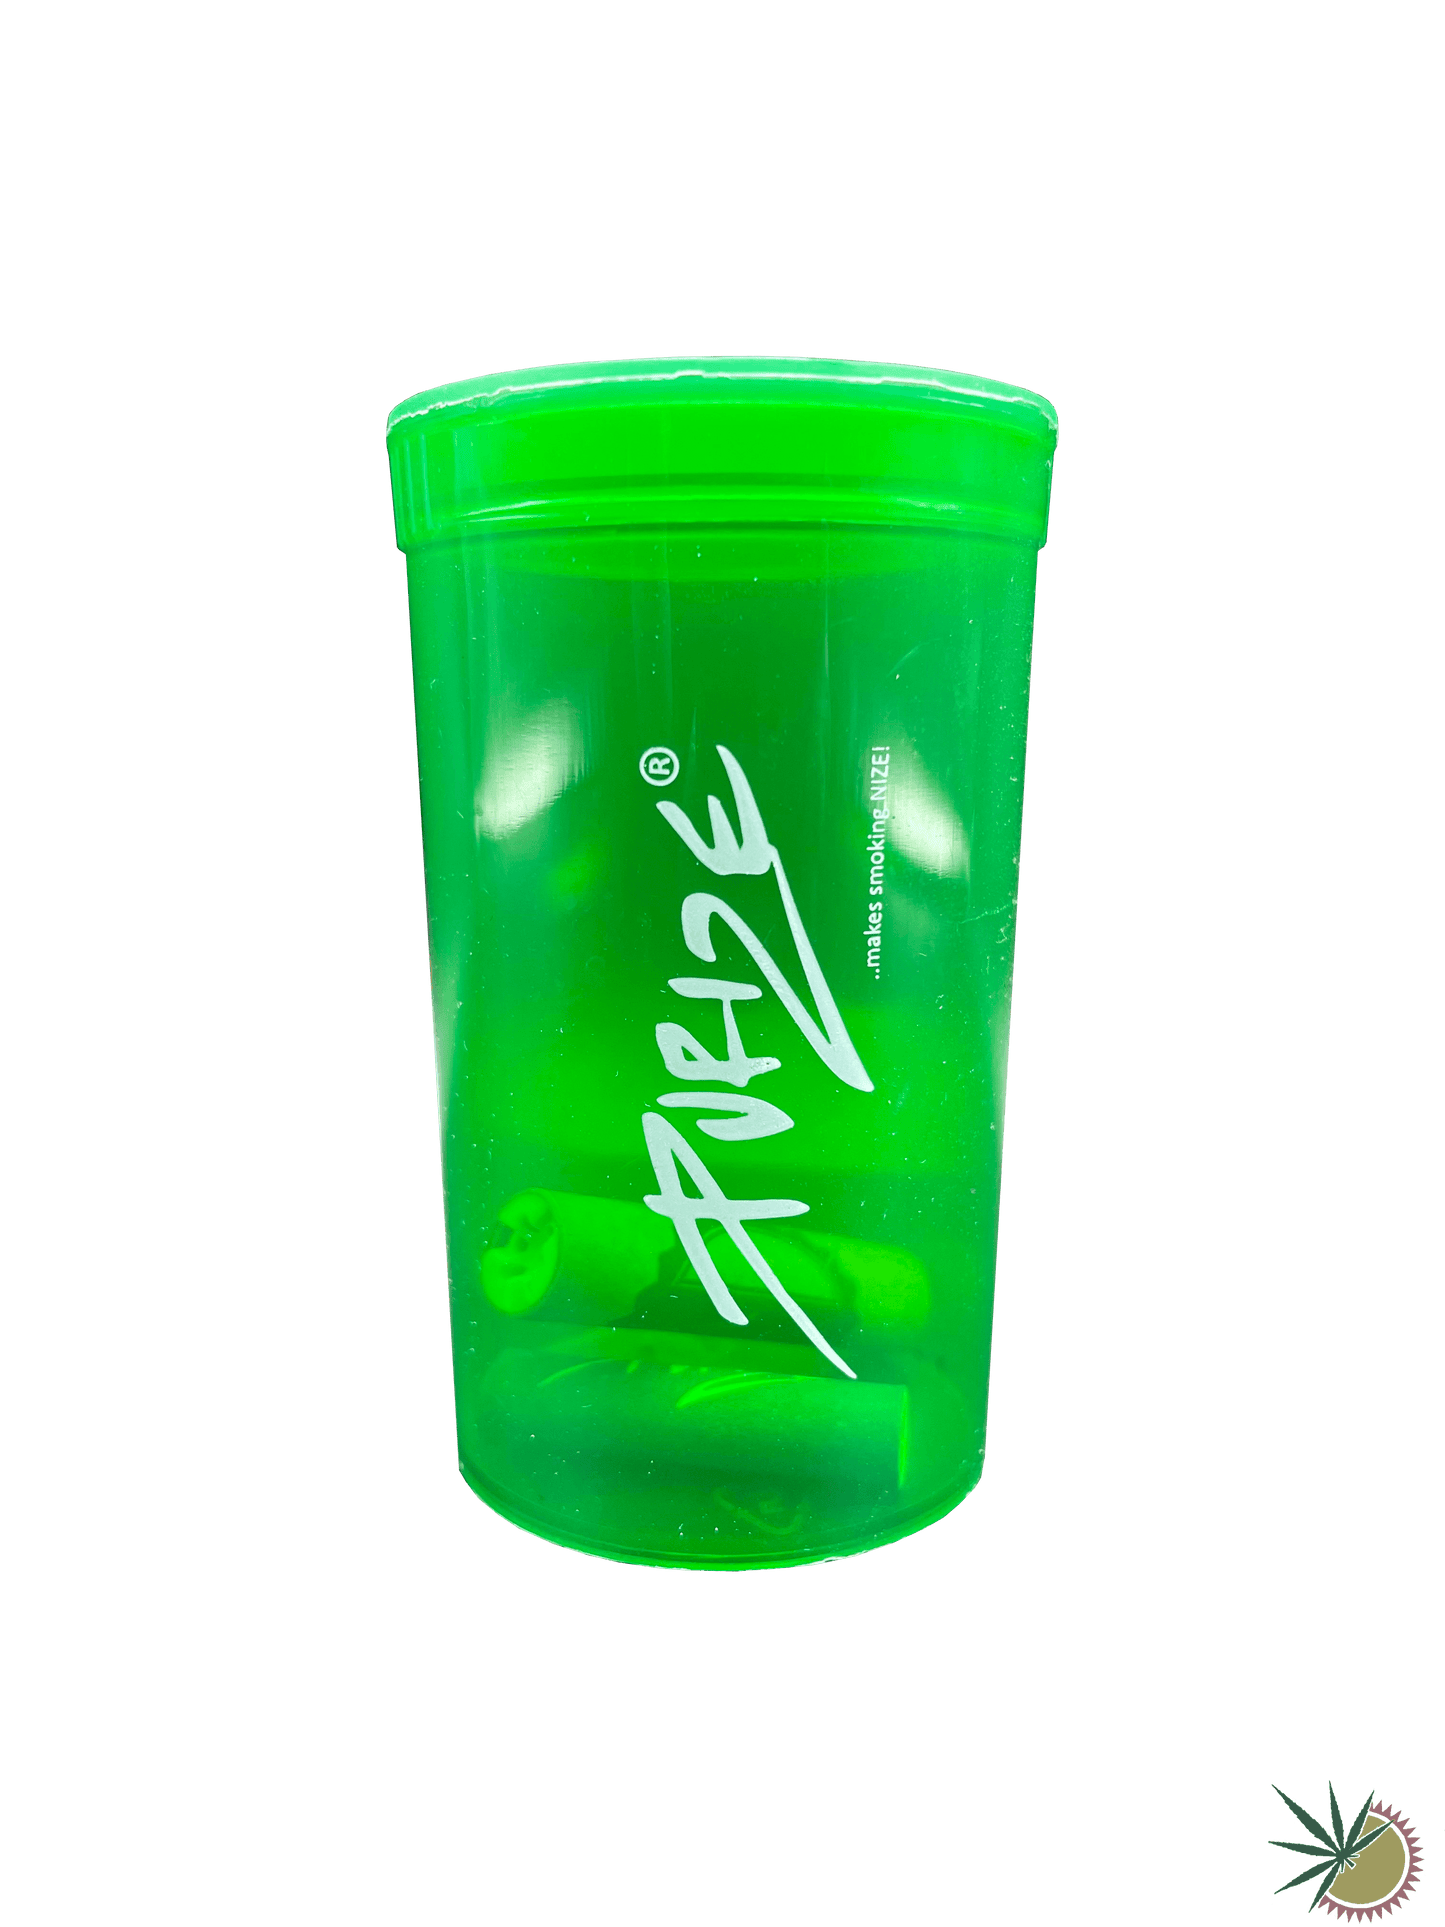 Purize Pop-Up Dose groß - THC Headshop